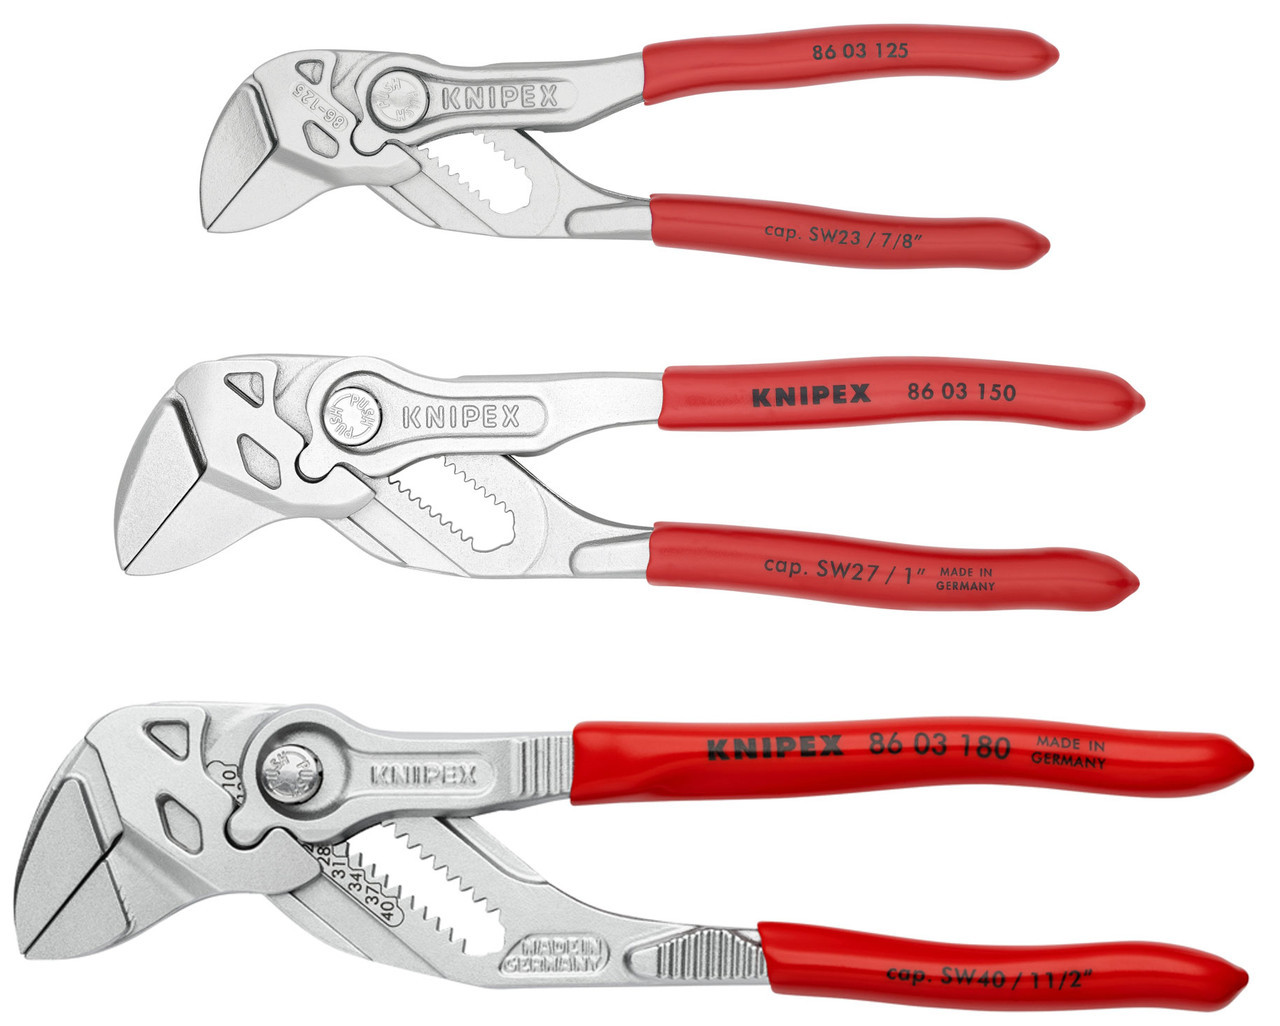 Knipex 3 pc Micro Pliers Wrench Set, 125, 150, and 180mm -   Inc